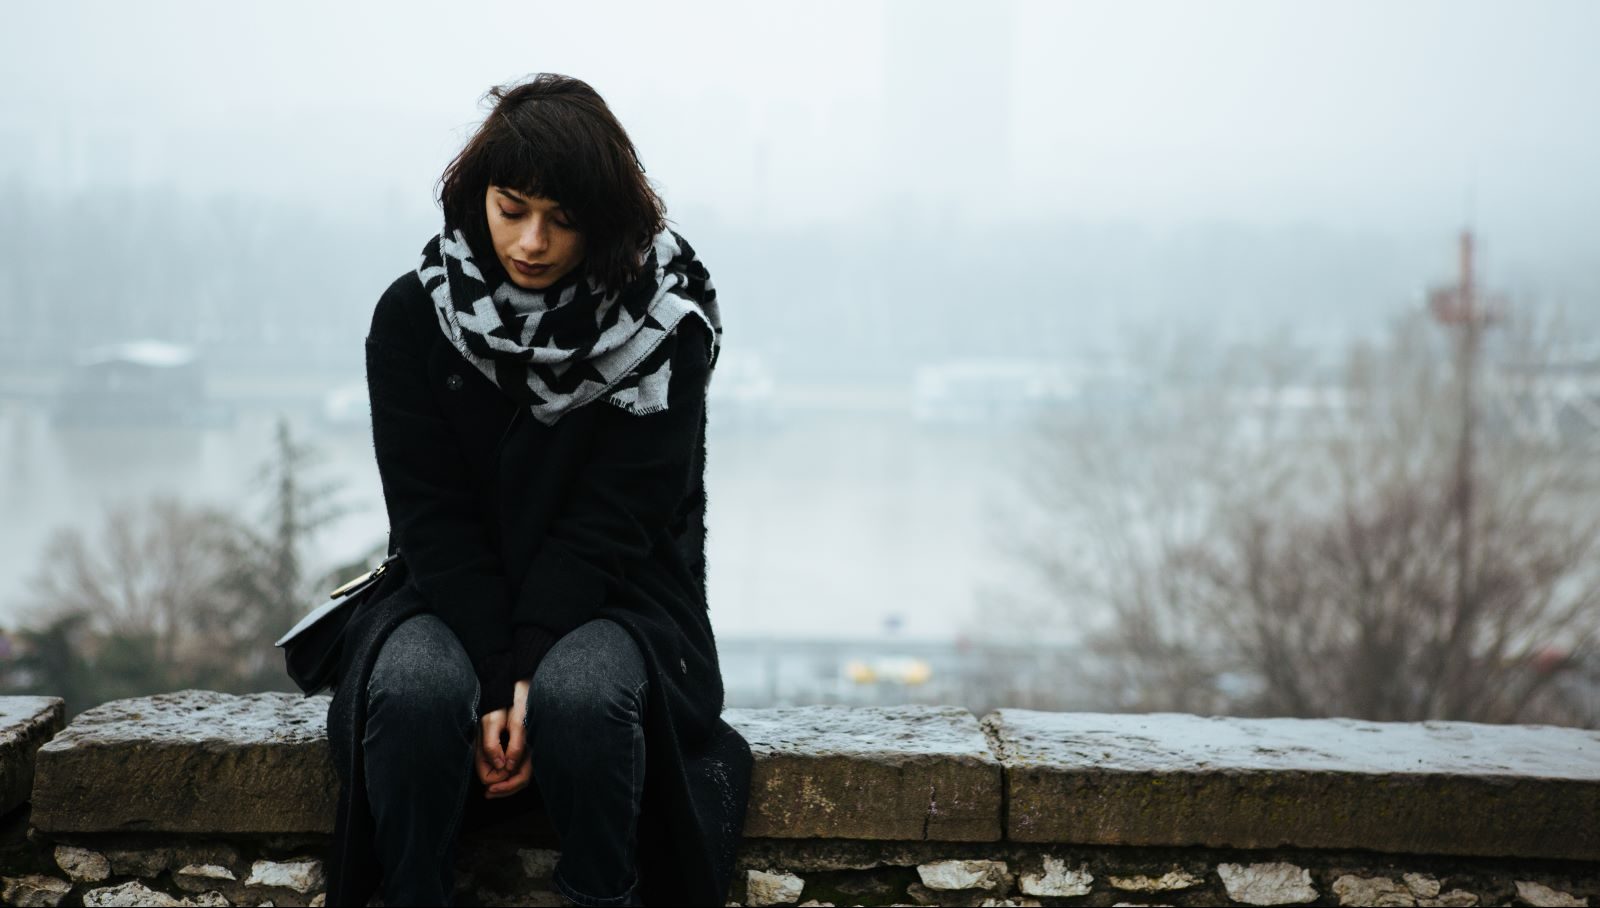 A person suffers from Seasonal Affective Disorder (SAD).